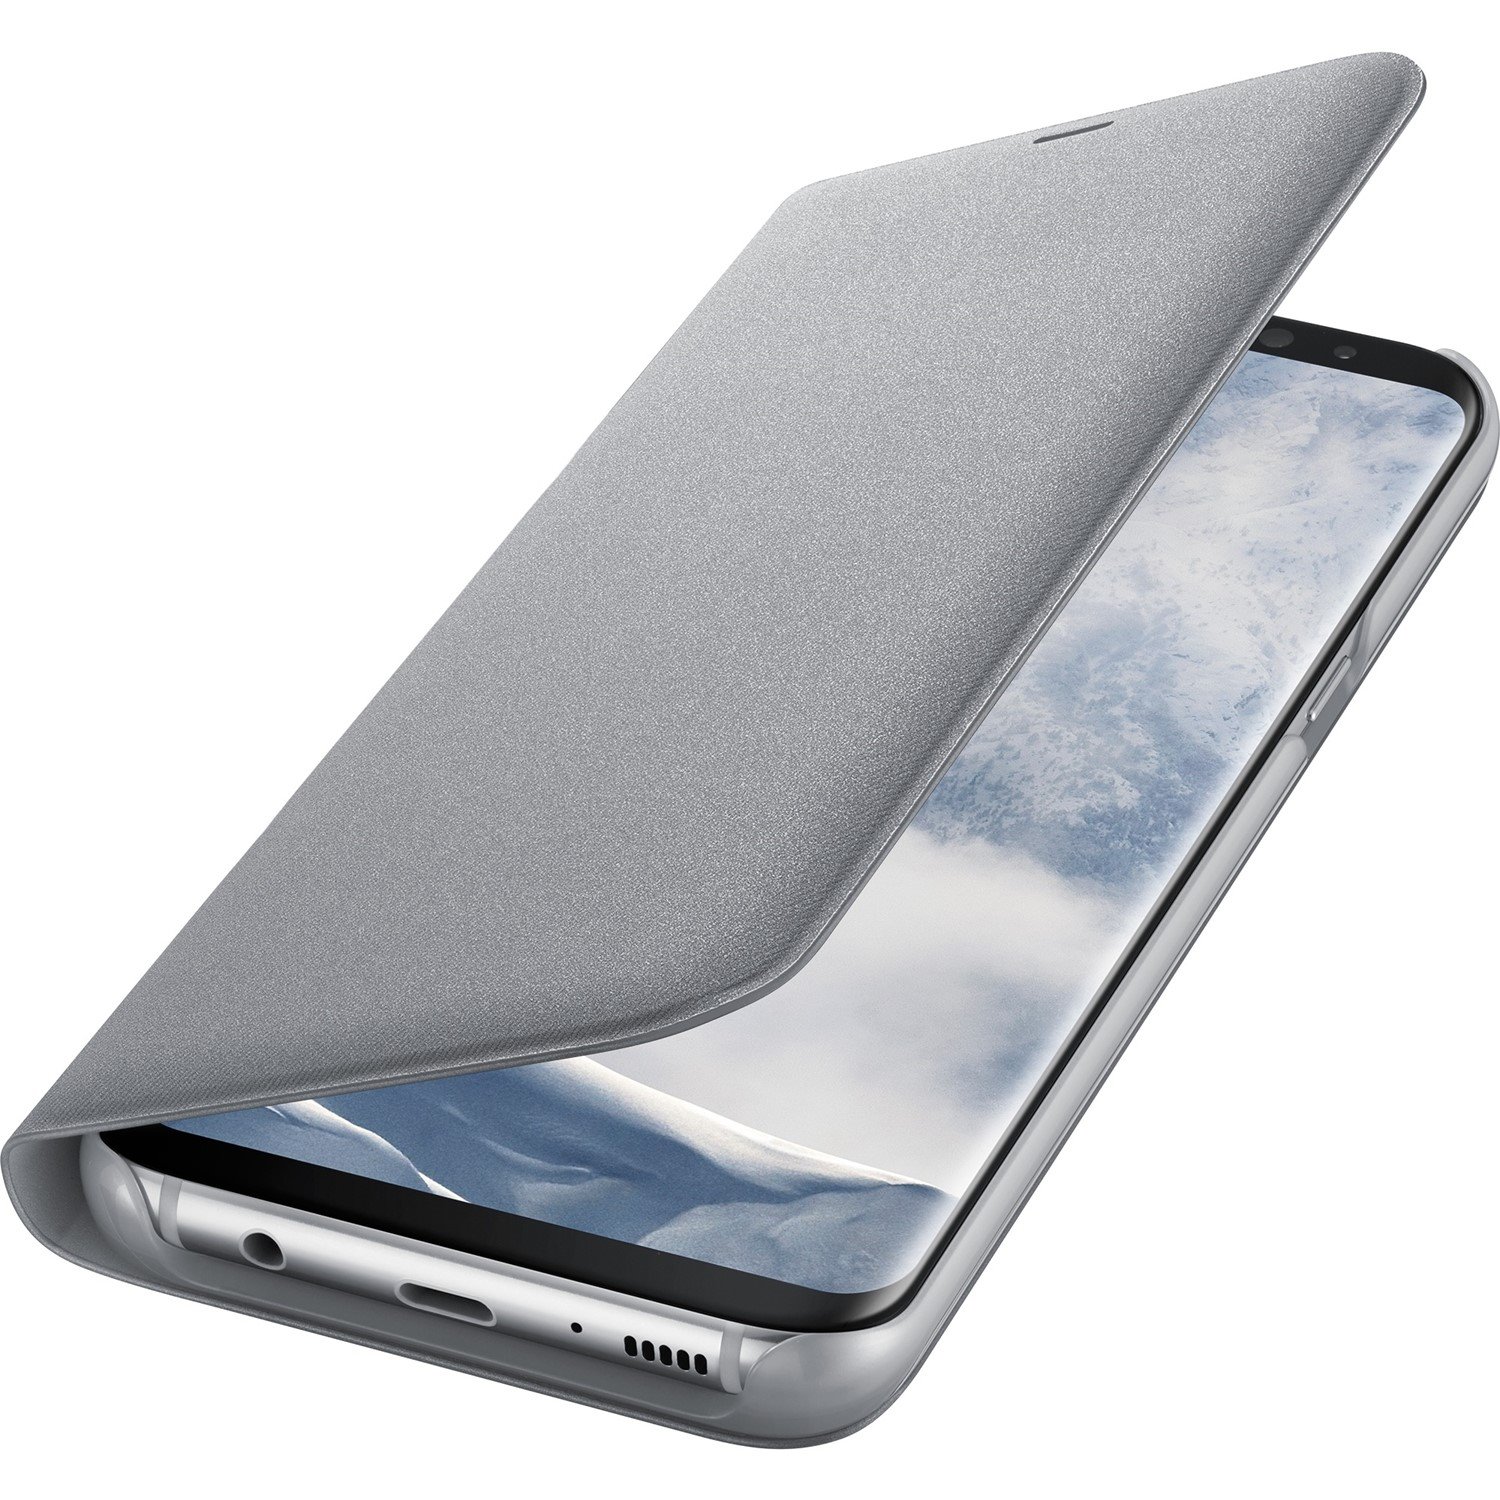 Download Buy Samsung Carrying Case Smartphone - Silver | Virtunet